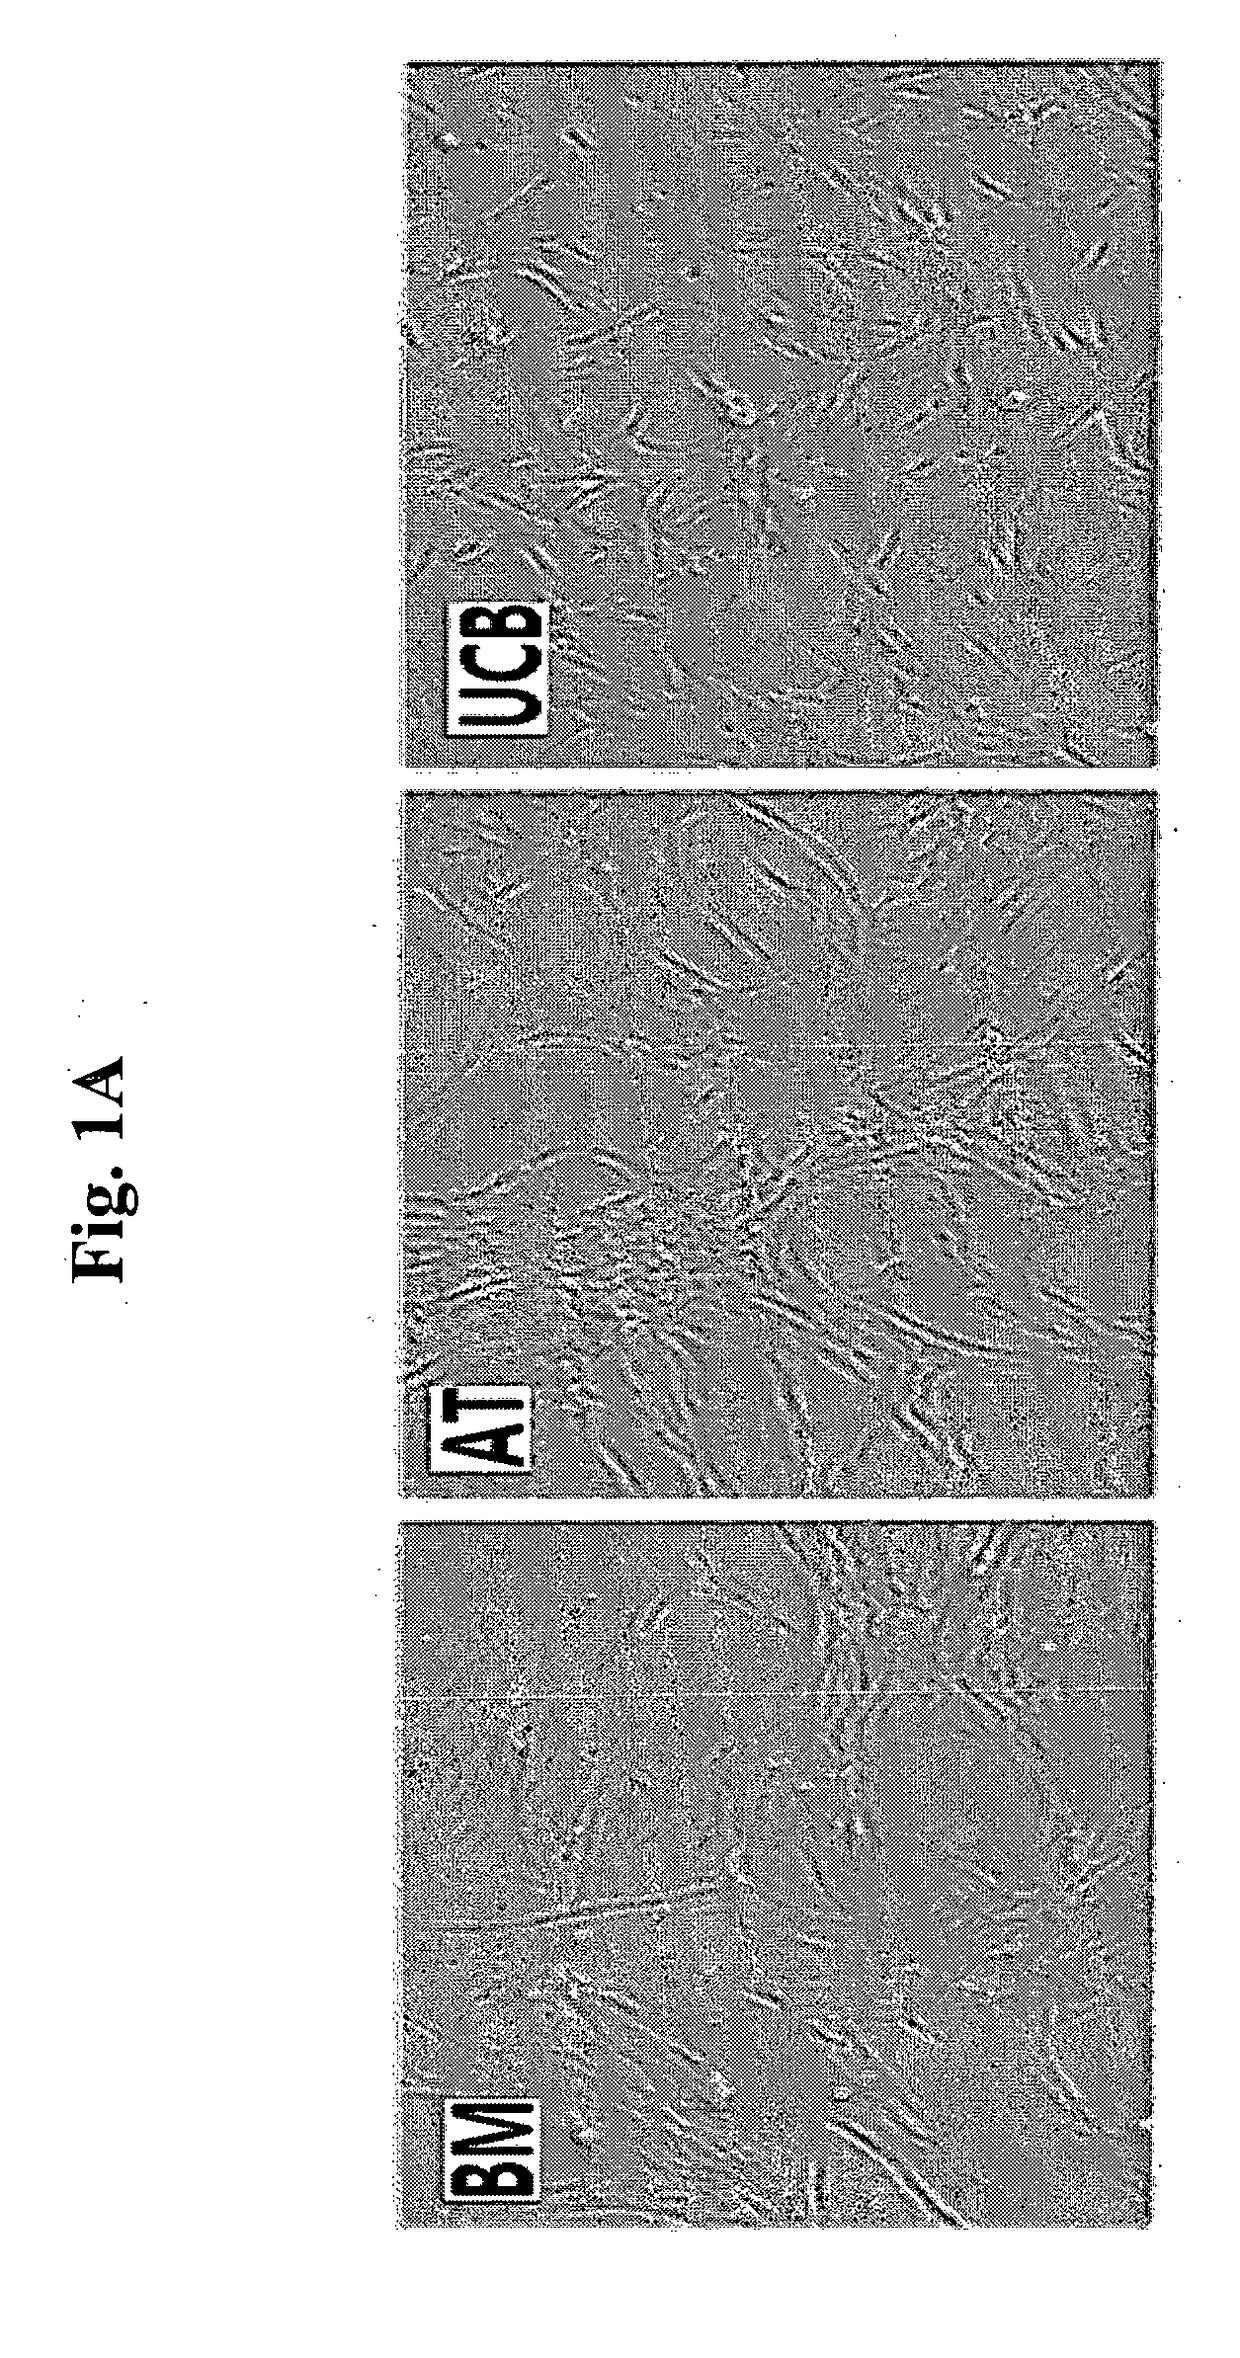 Pharmaceutical composition for the prevention or treatment of a pulmonary disorder comprising mesenchymal stem cells having improved proliferation and differentiation capacity